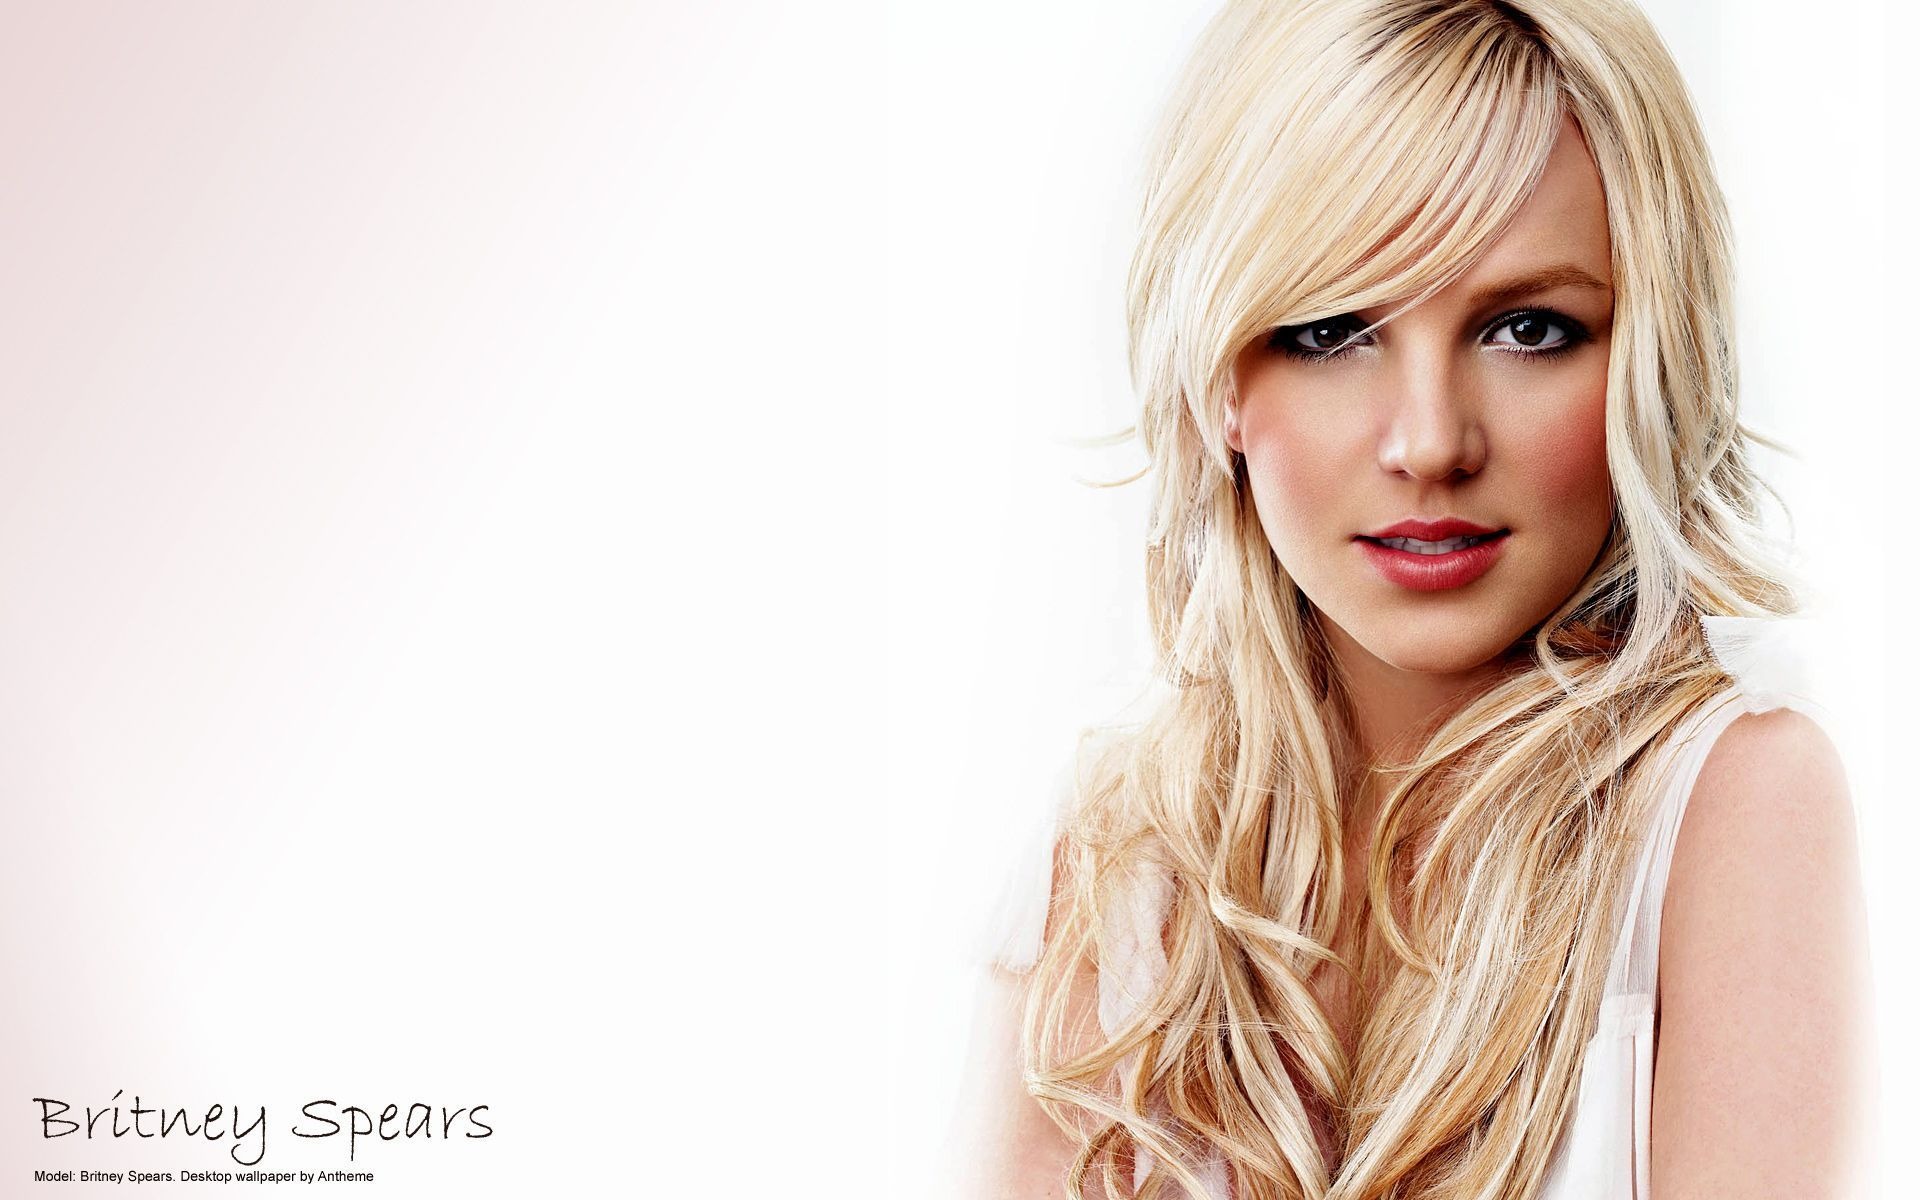 Britney Spears #015 - 1920x1200 Wallpapers Pictures Photos Images